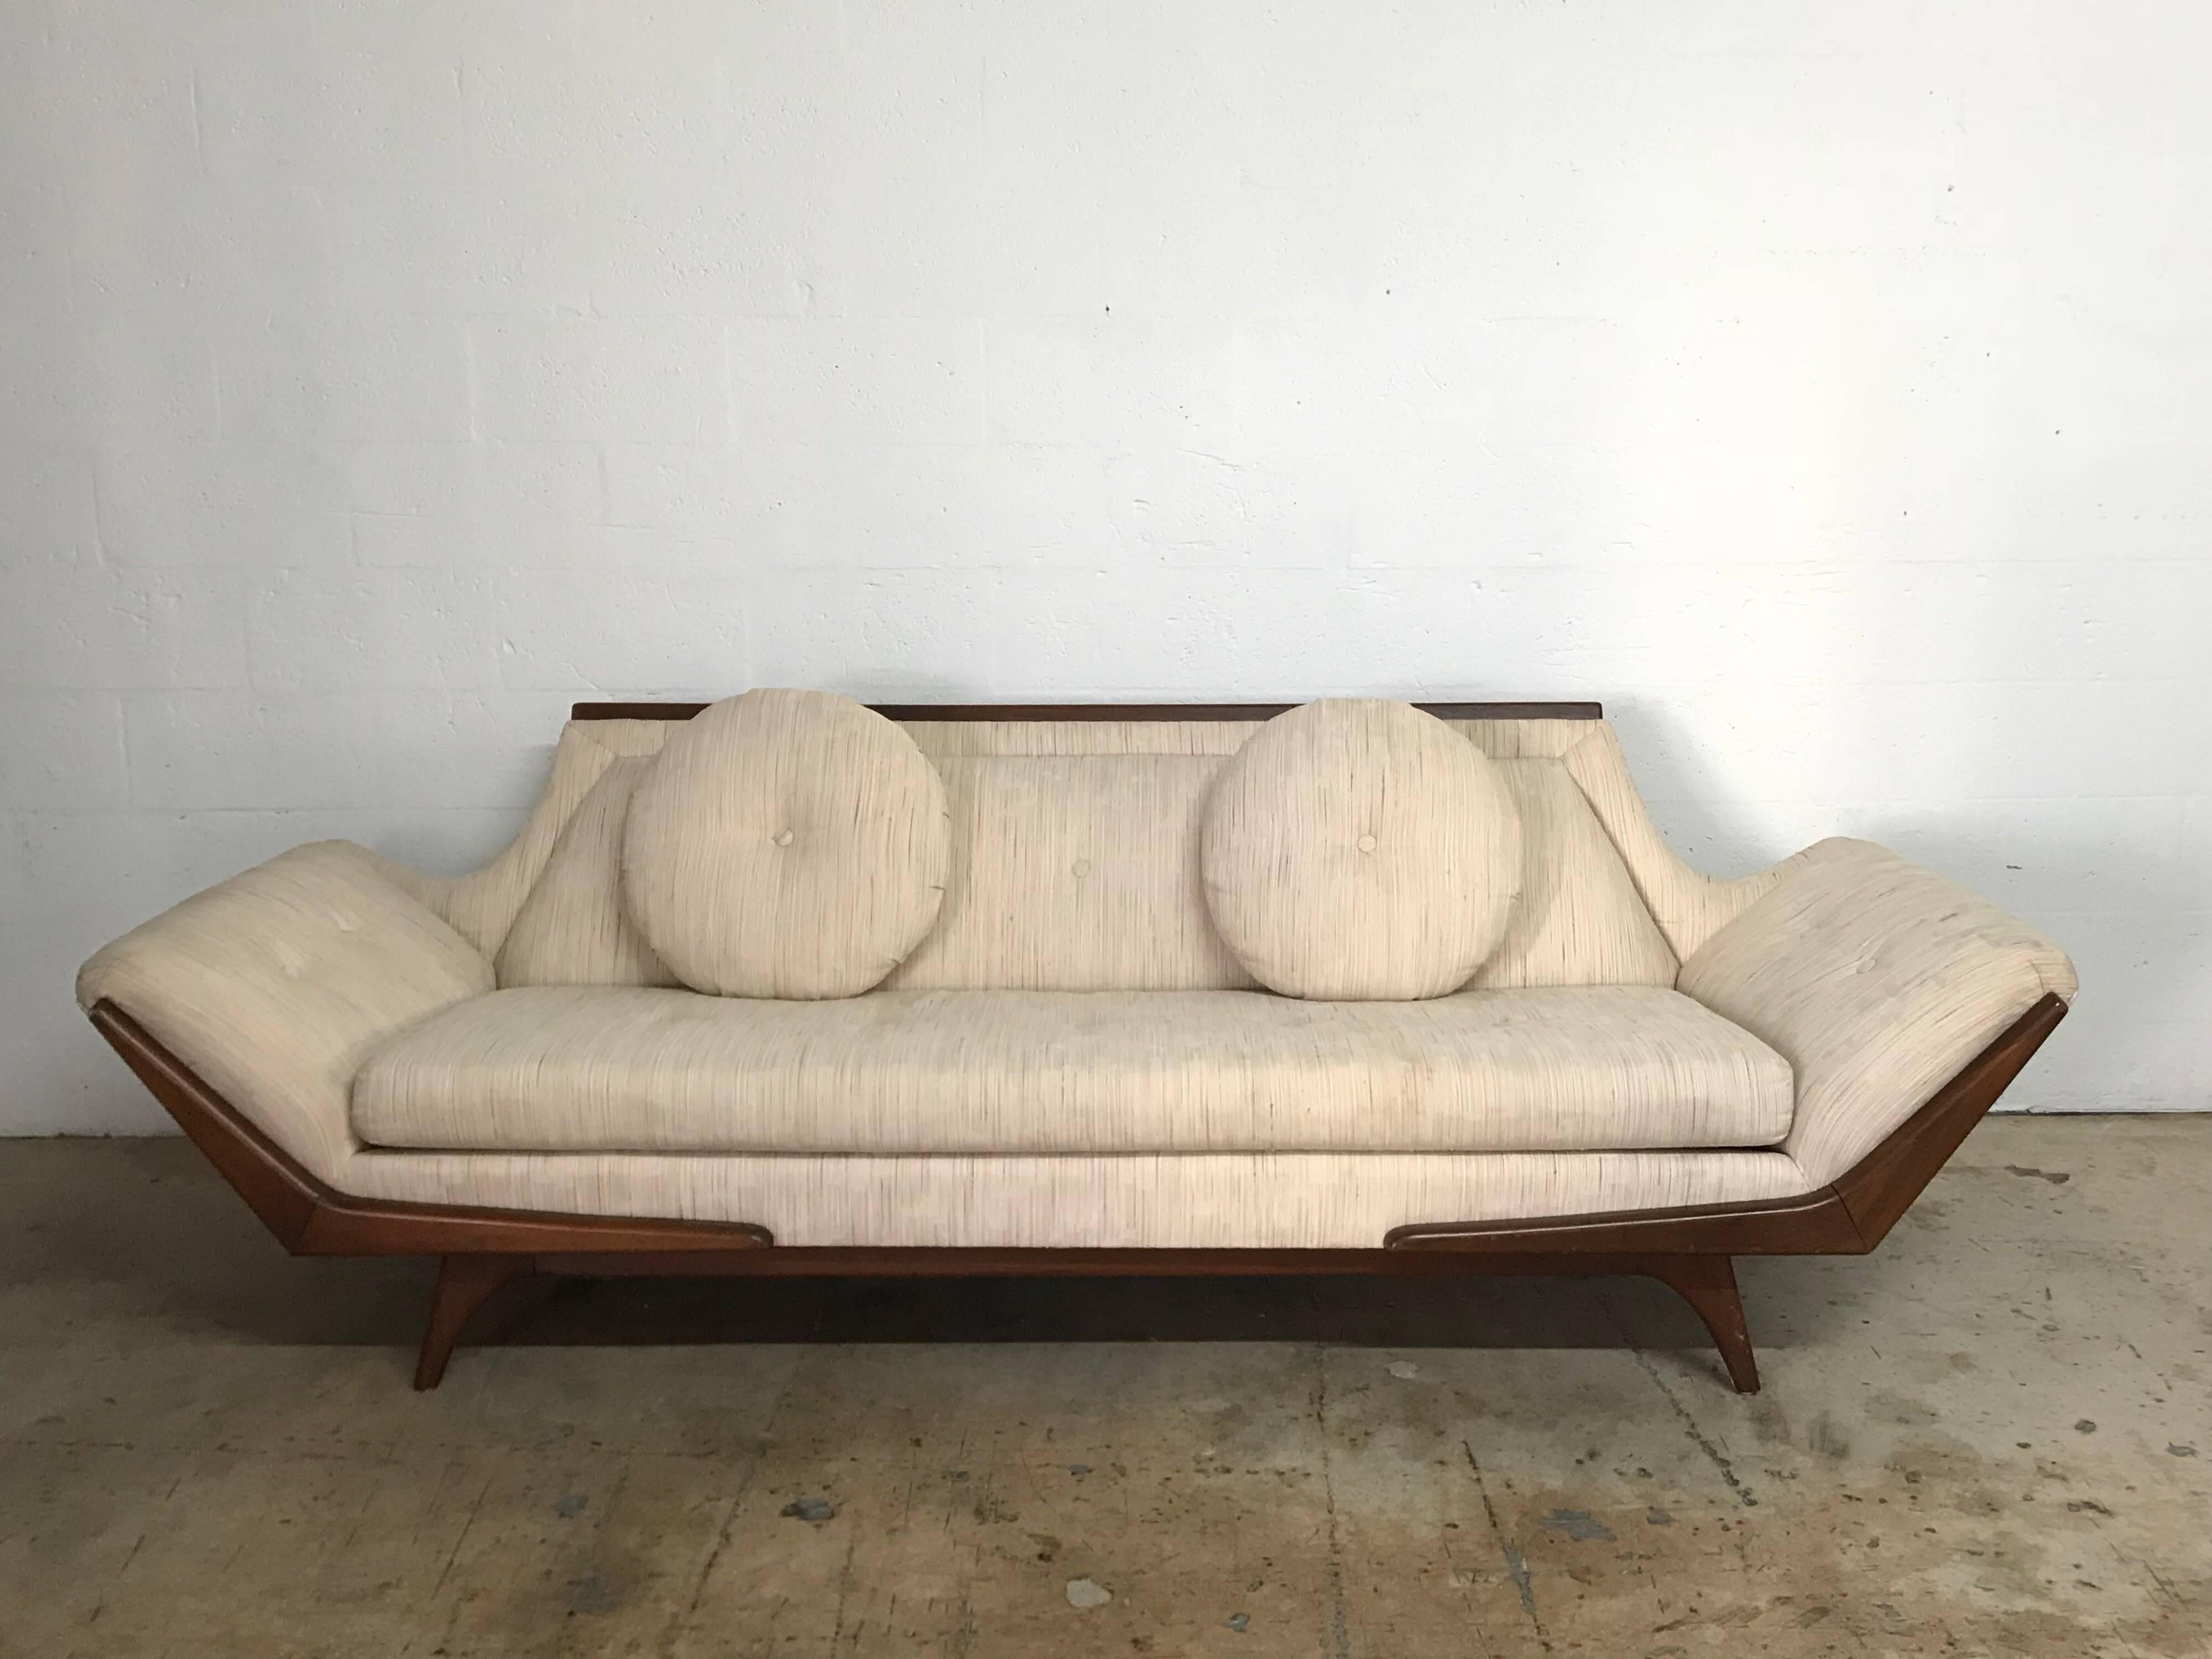 Gondola sofa designed by Adrian Pearsall for Craft Associates, rendered in walnut with original woven upholstery and matching round throw pillows.